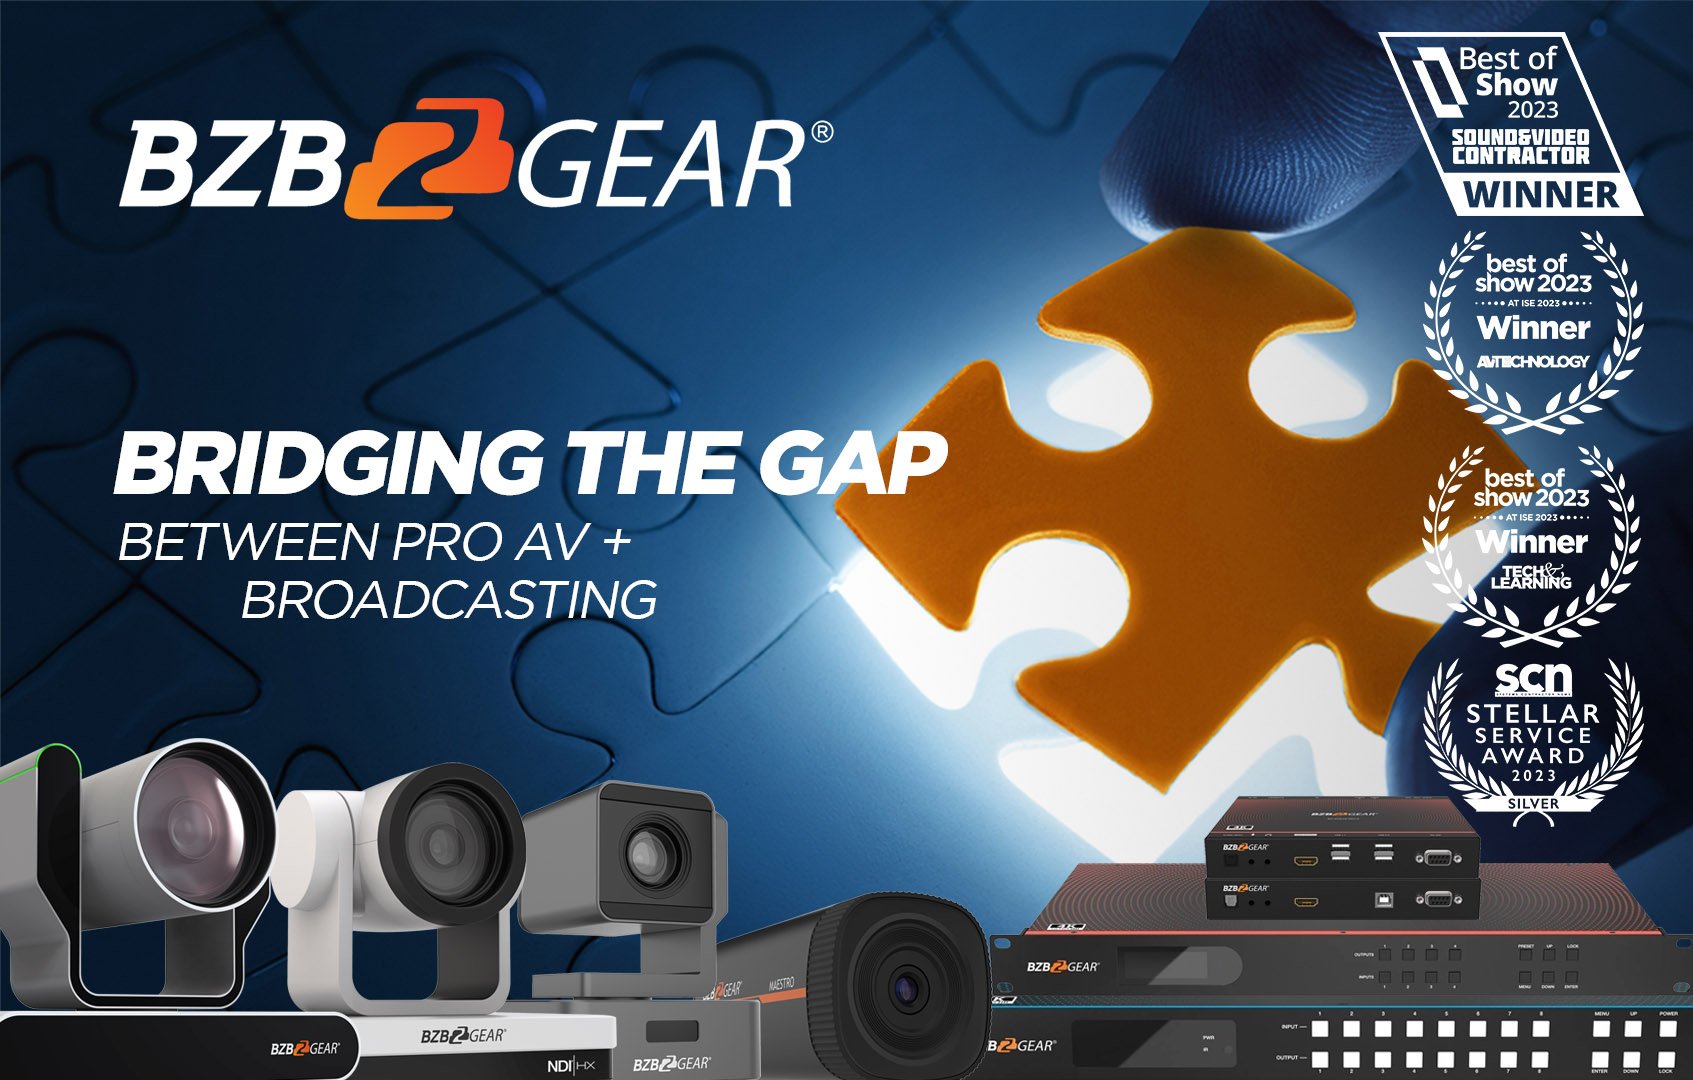 BZBGEAR About Us (image) - D-Tools (newsletter)